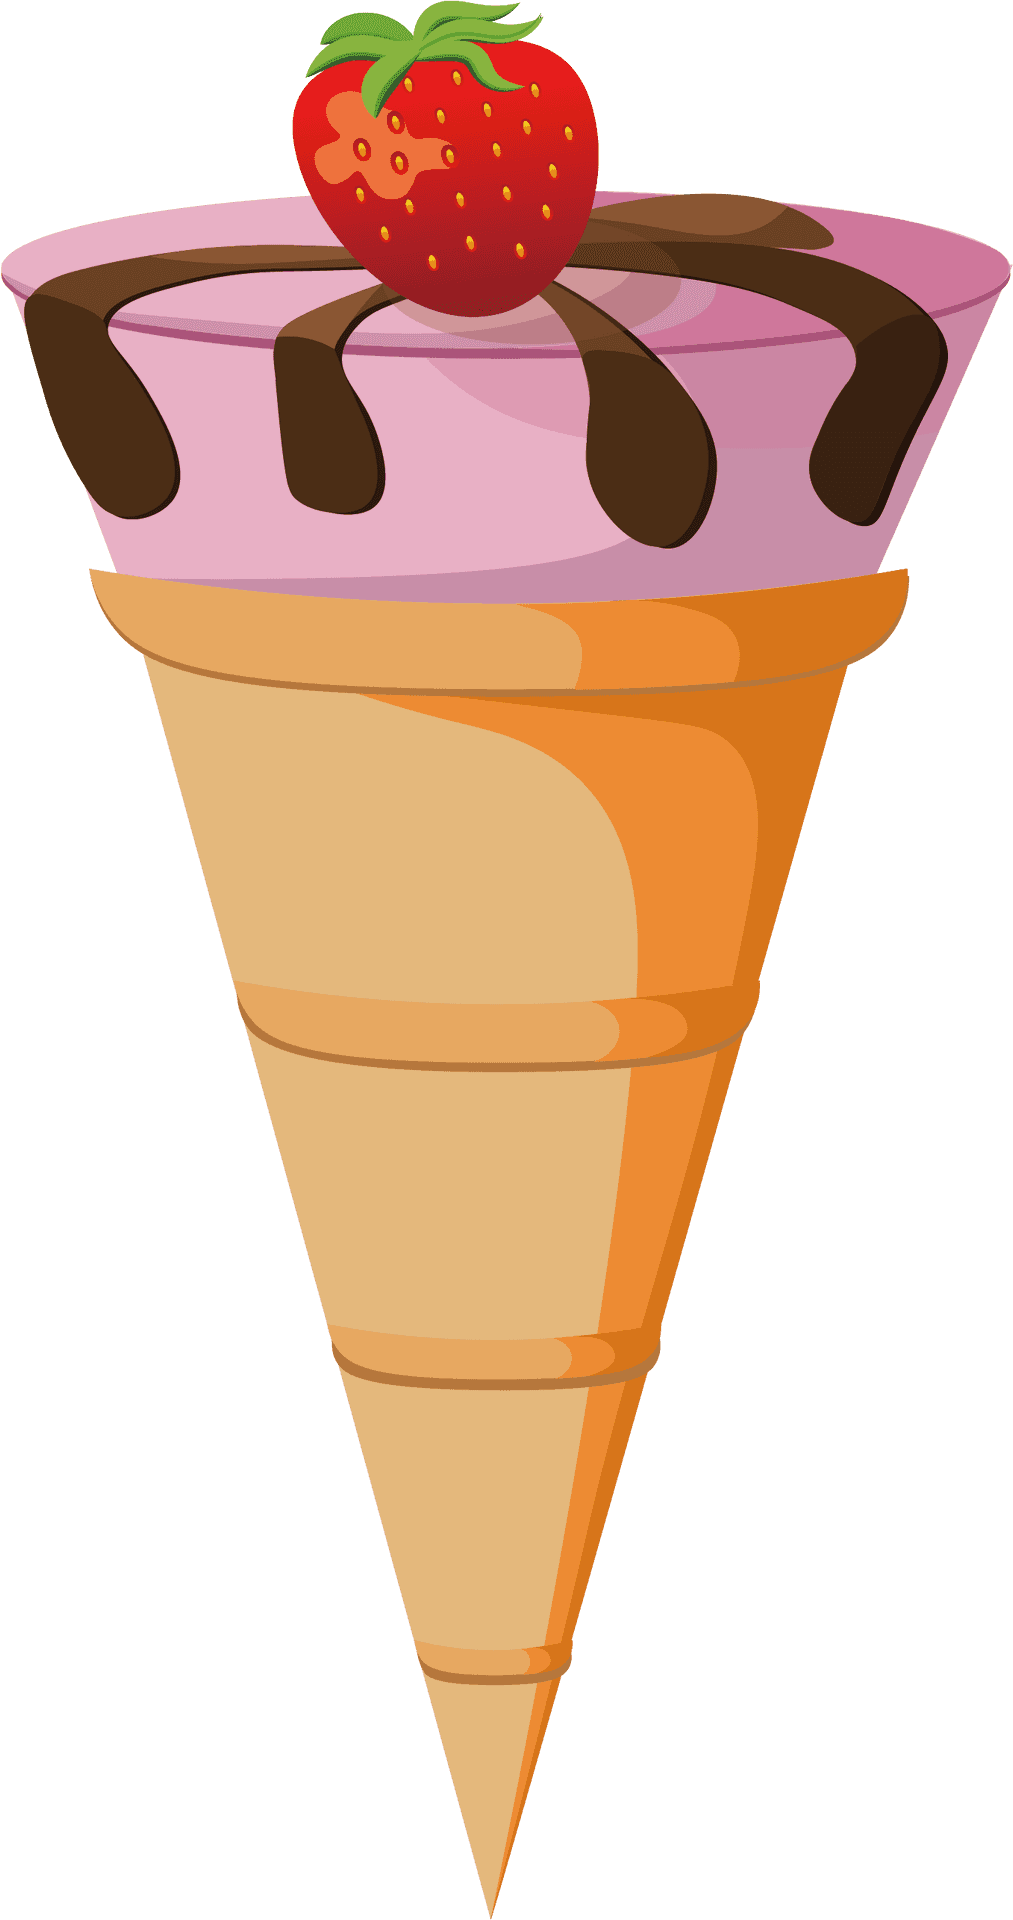 Strawberry Topped Ice Cream Cone Illustration PNG image